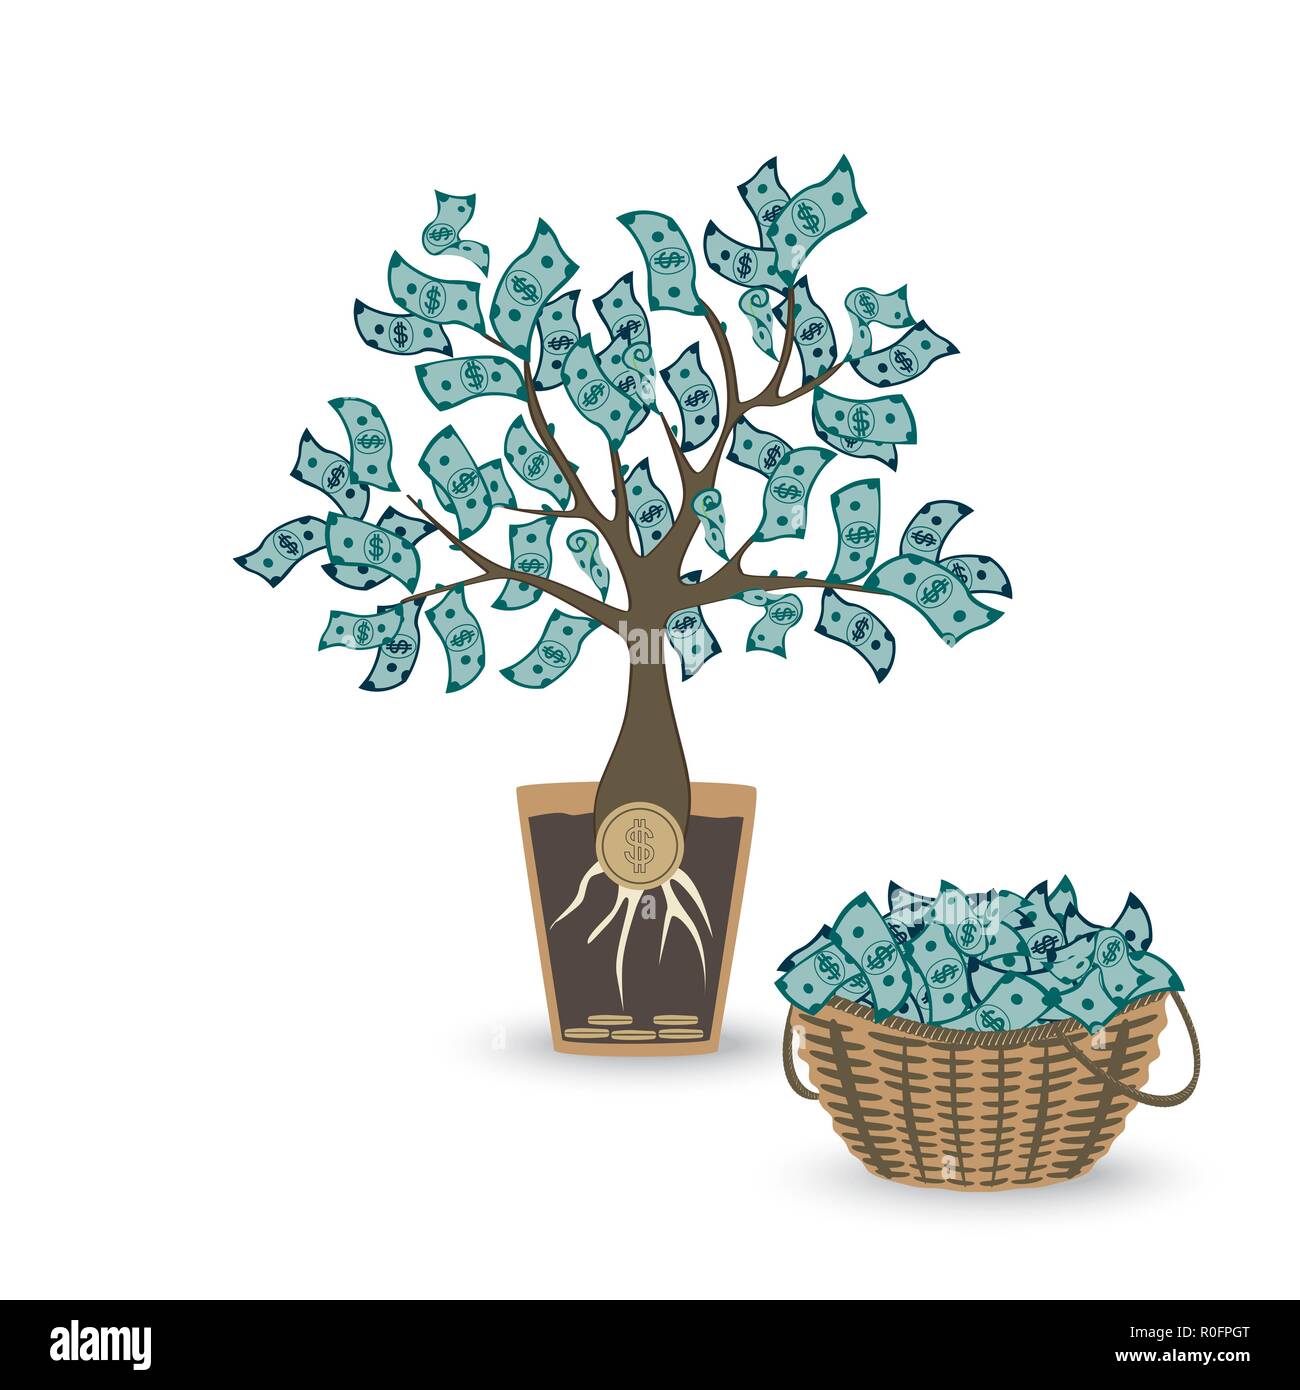 Money tree with a coin root. Green cash banknotes tree in ceramic pot and money basket. Business and investment harvest and income concept. Stock Vector